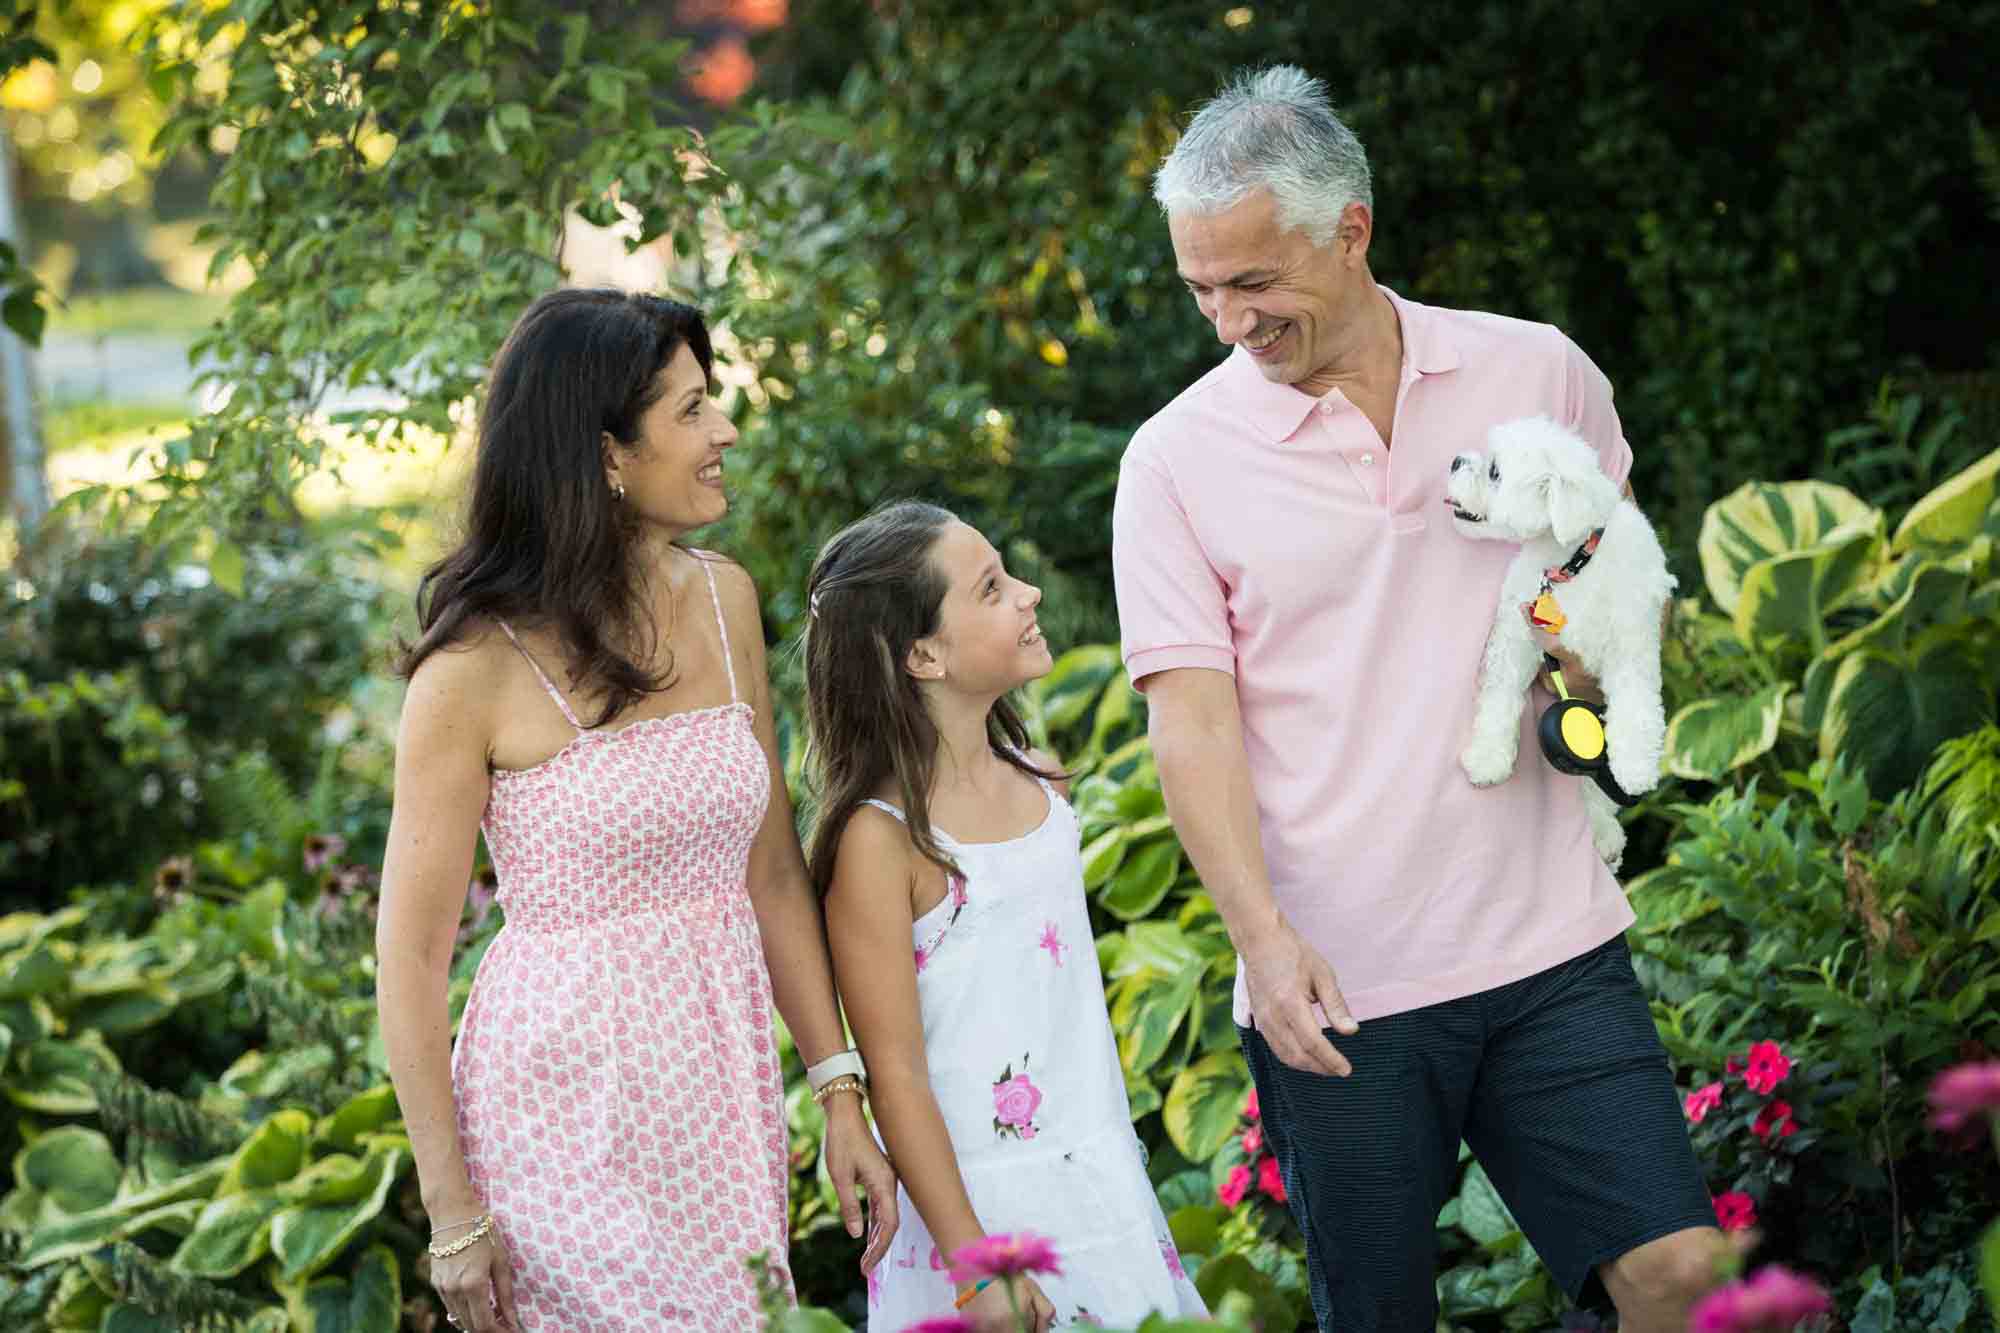 Parents holding small white dog and young girl walking in garden during a Forest Park family photo shoot